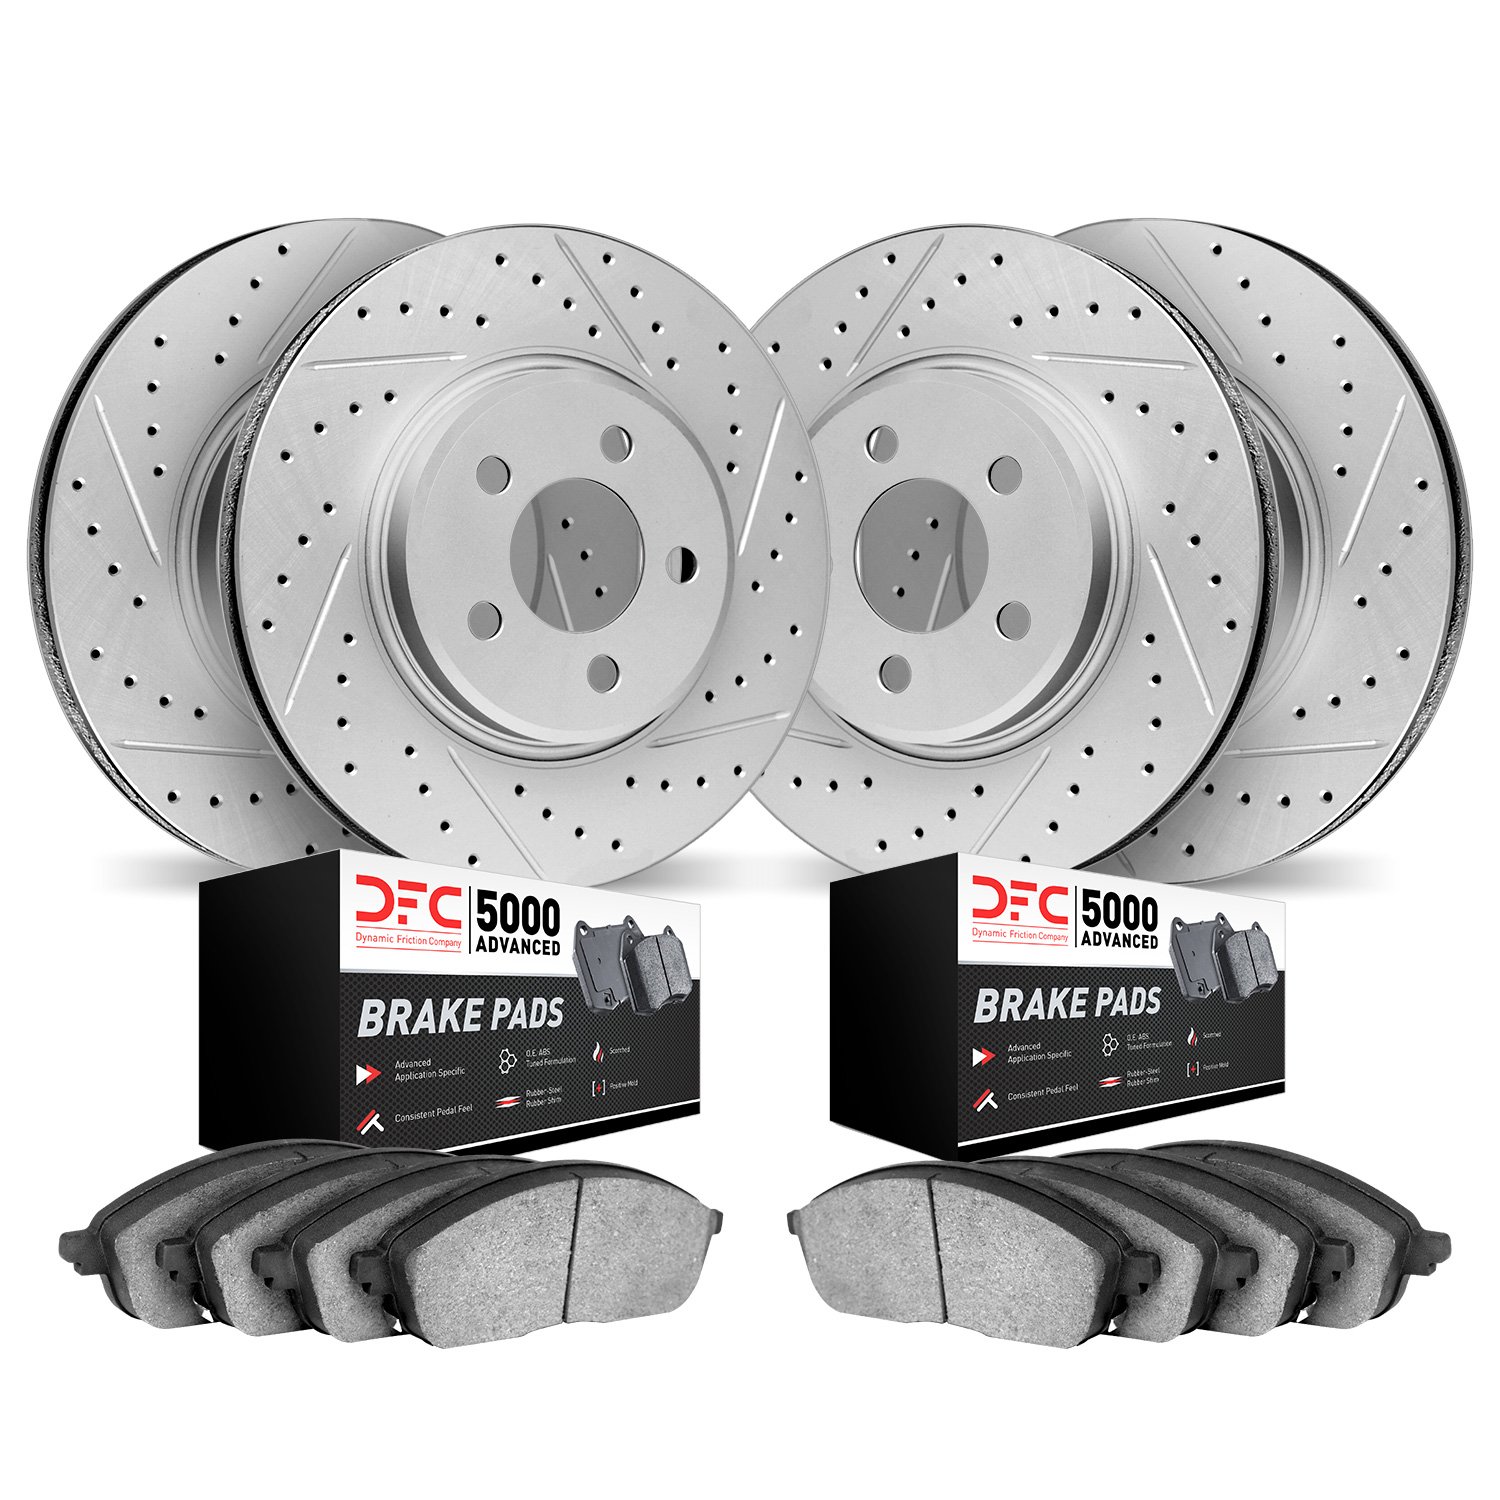 2504-02005 Geoperformance Drilled/Slotted Rotors w/5000 Advanced Brake Pads Kit, 1987-1989 Porsche, Position: Front and Rear